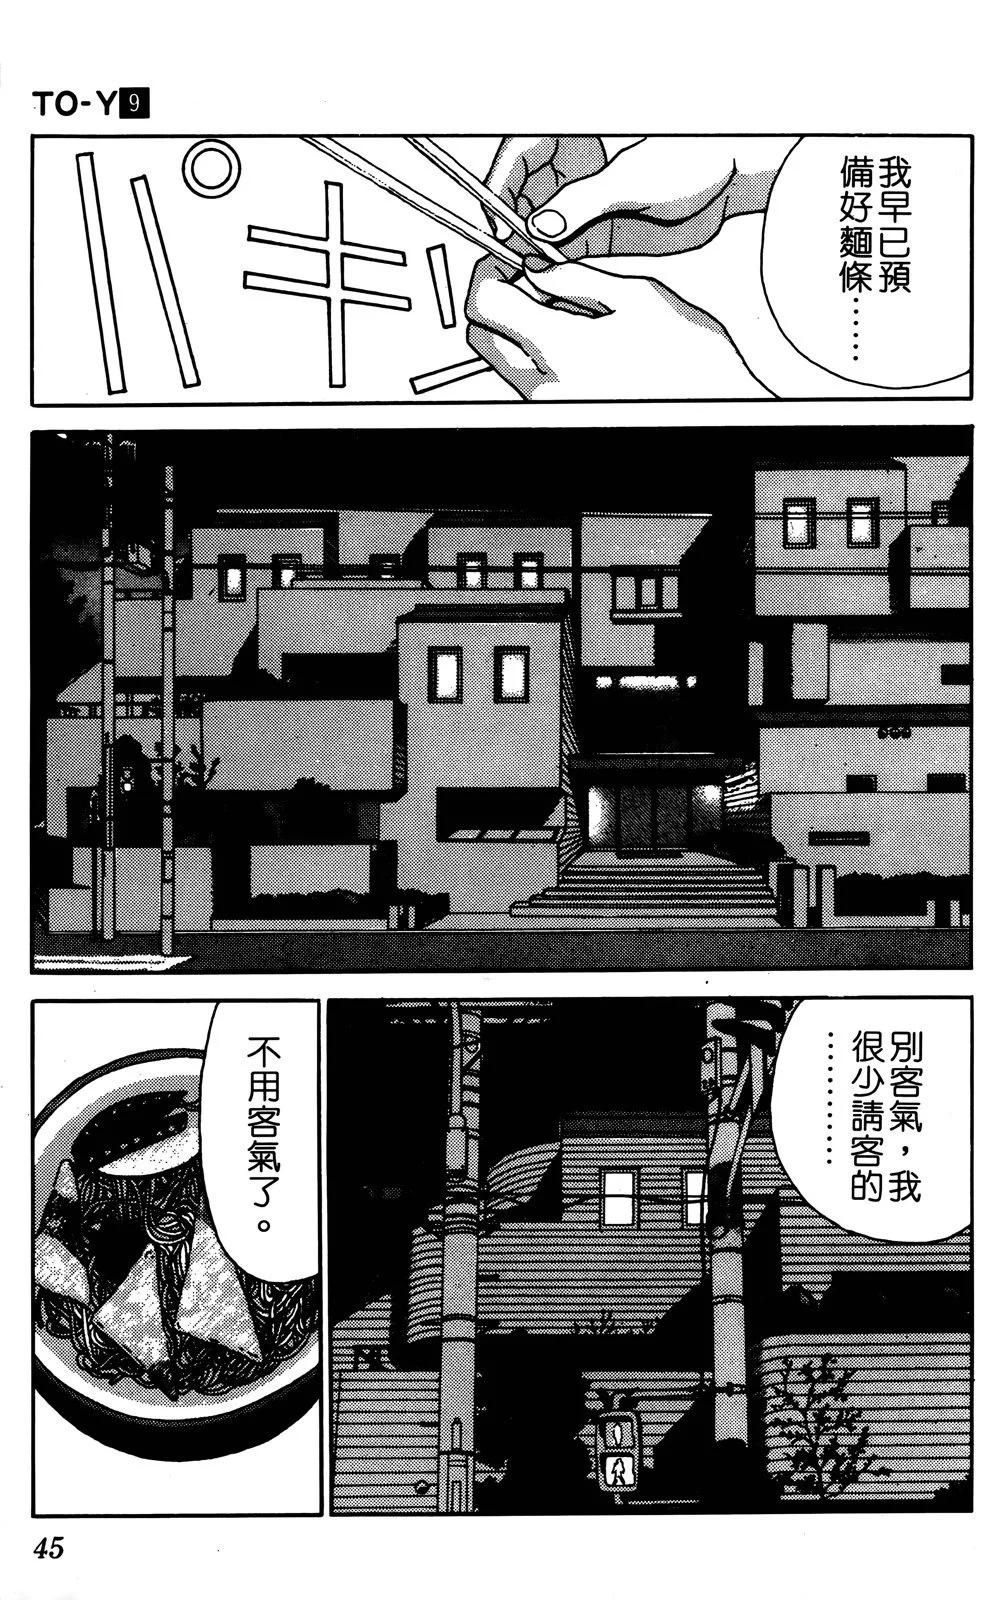 TO-Y - 第09卷(1/4) - 5